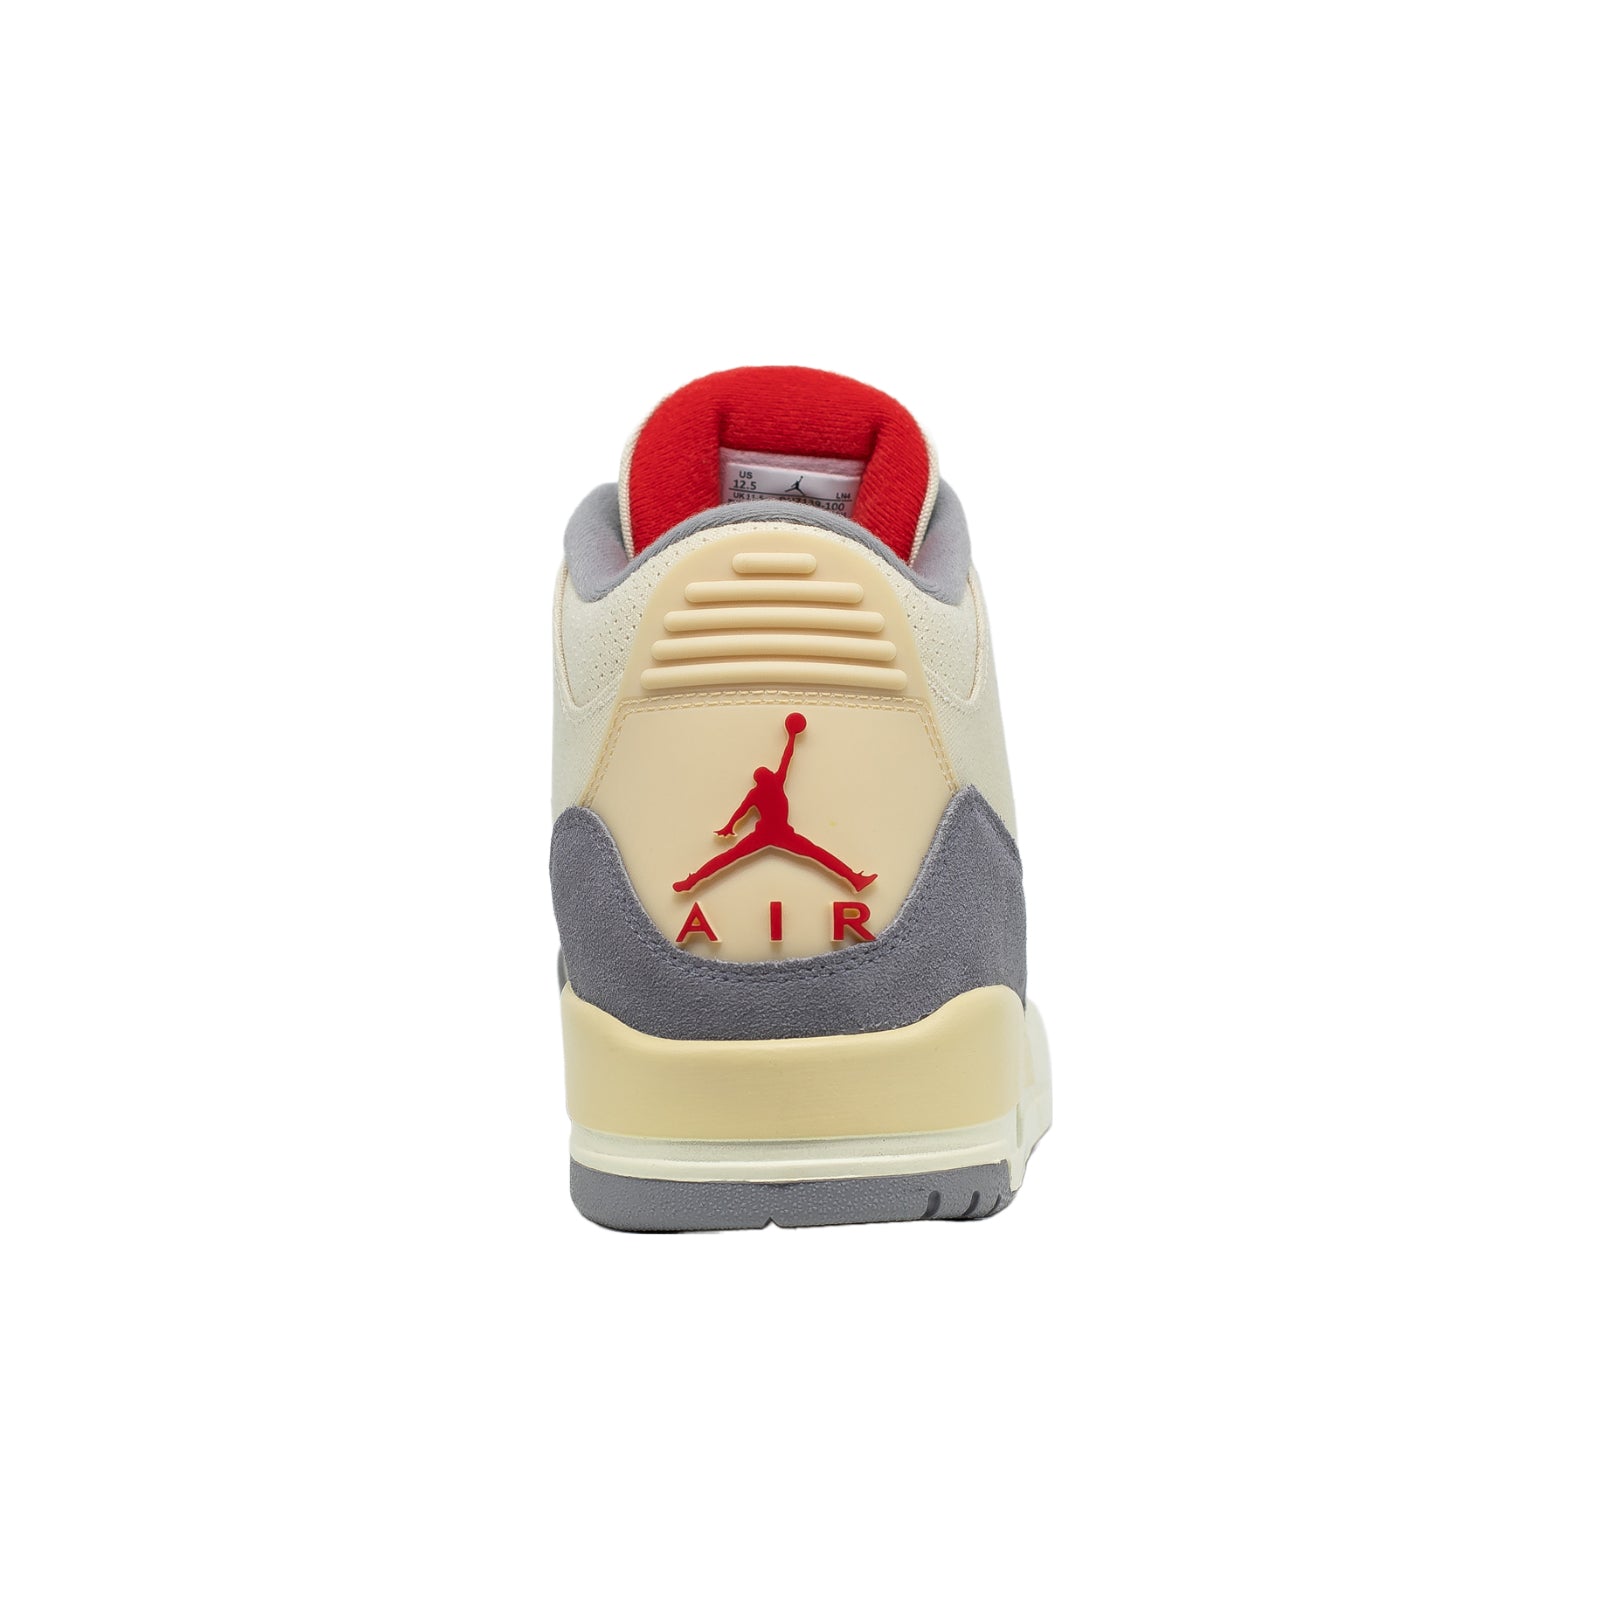 Jordan Brands womens lineup continues to grow and we have another pair of the